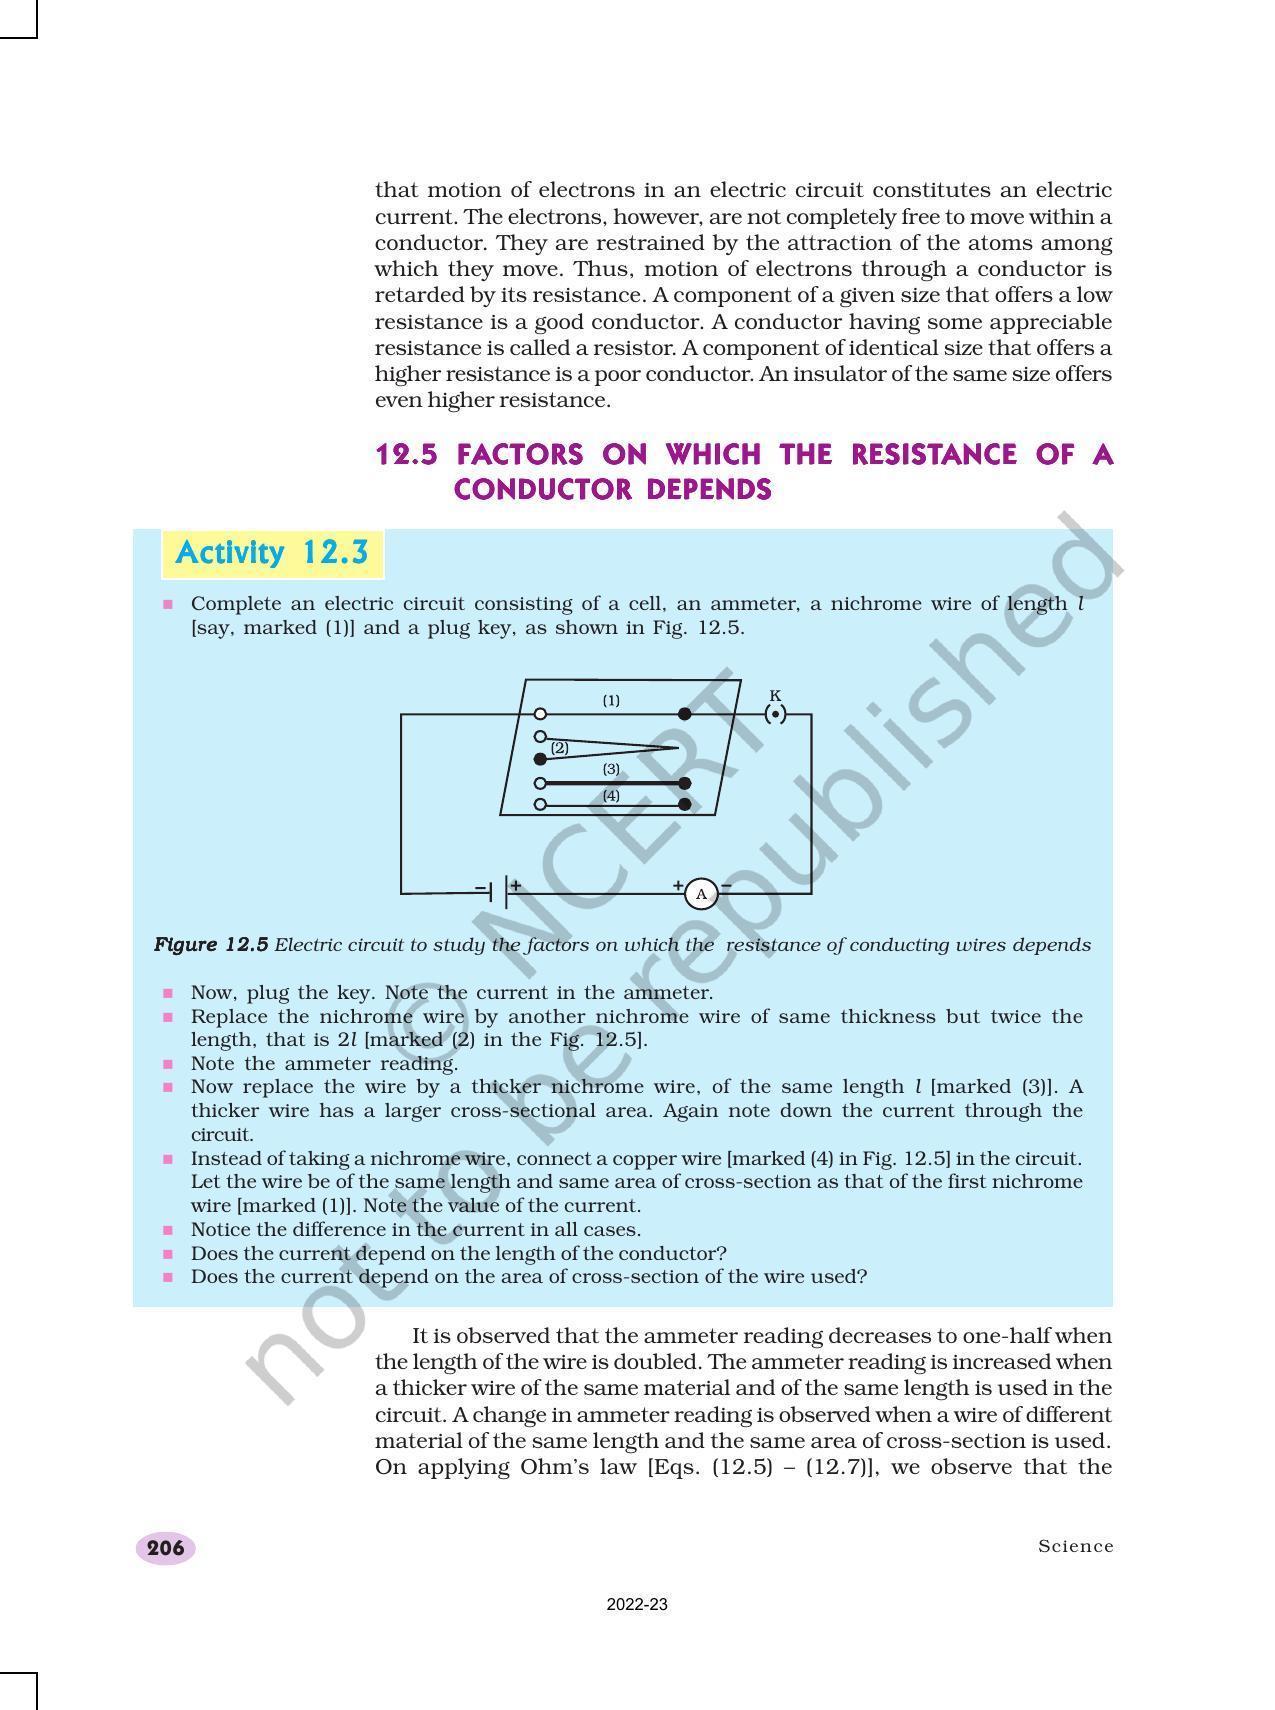 NCERT Book for Class 10 Science Chapter 12 Electricity - Page 8